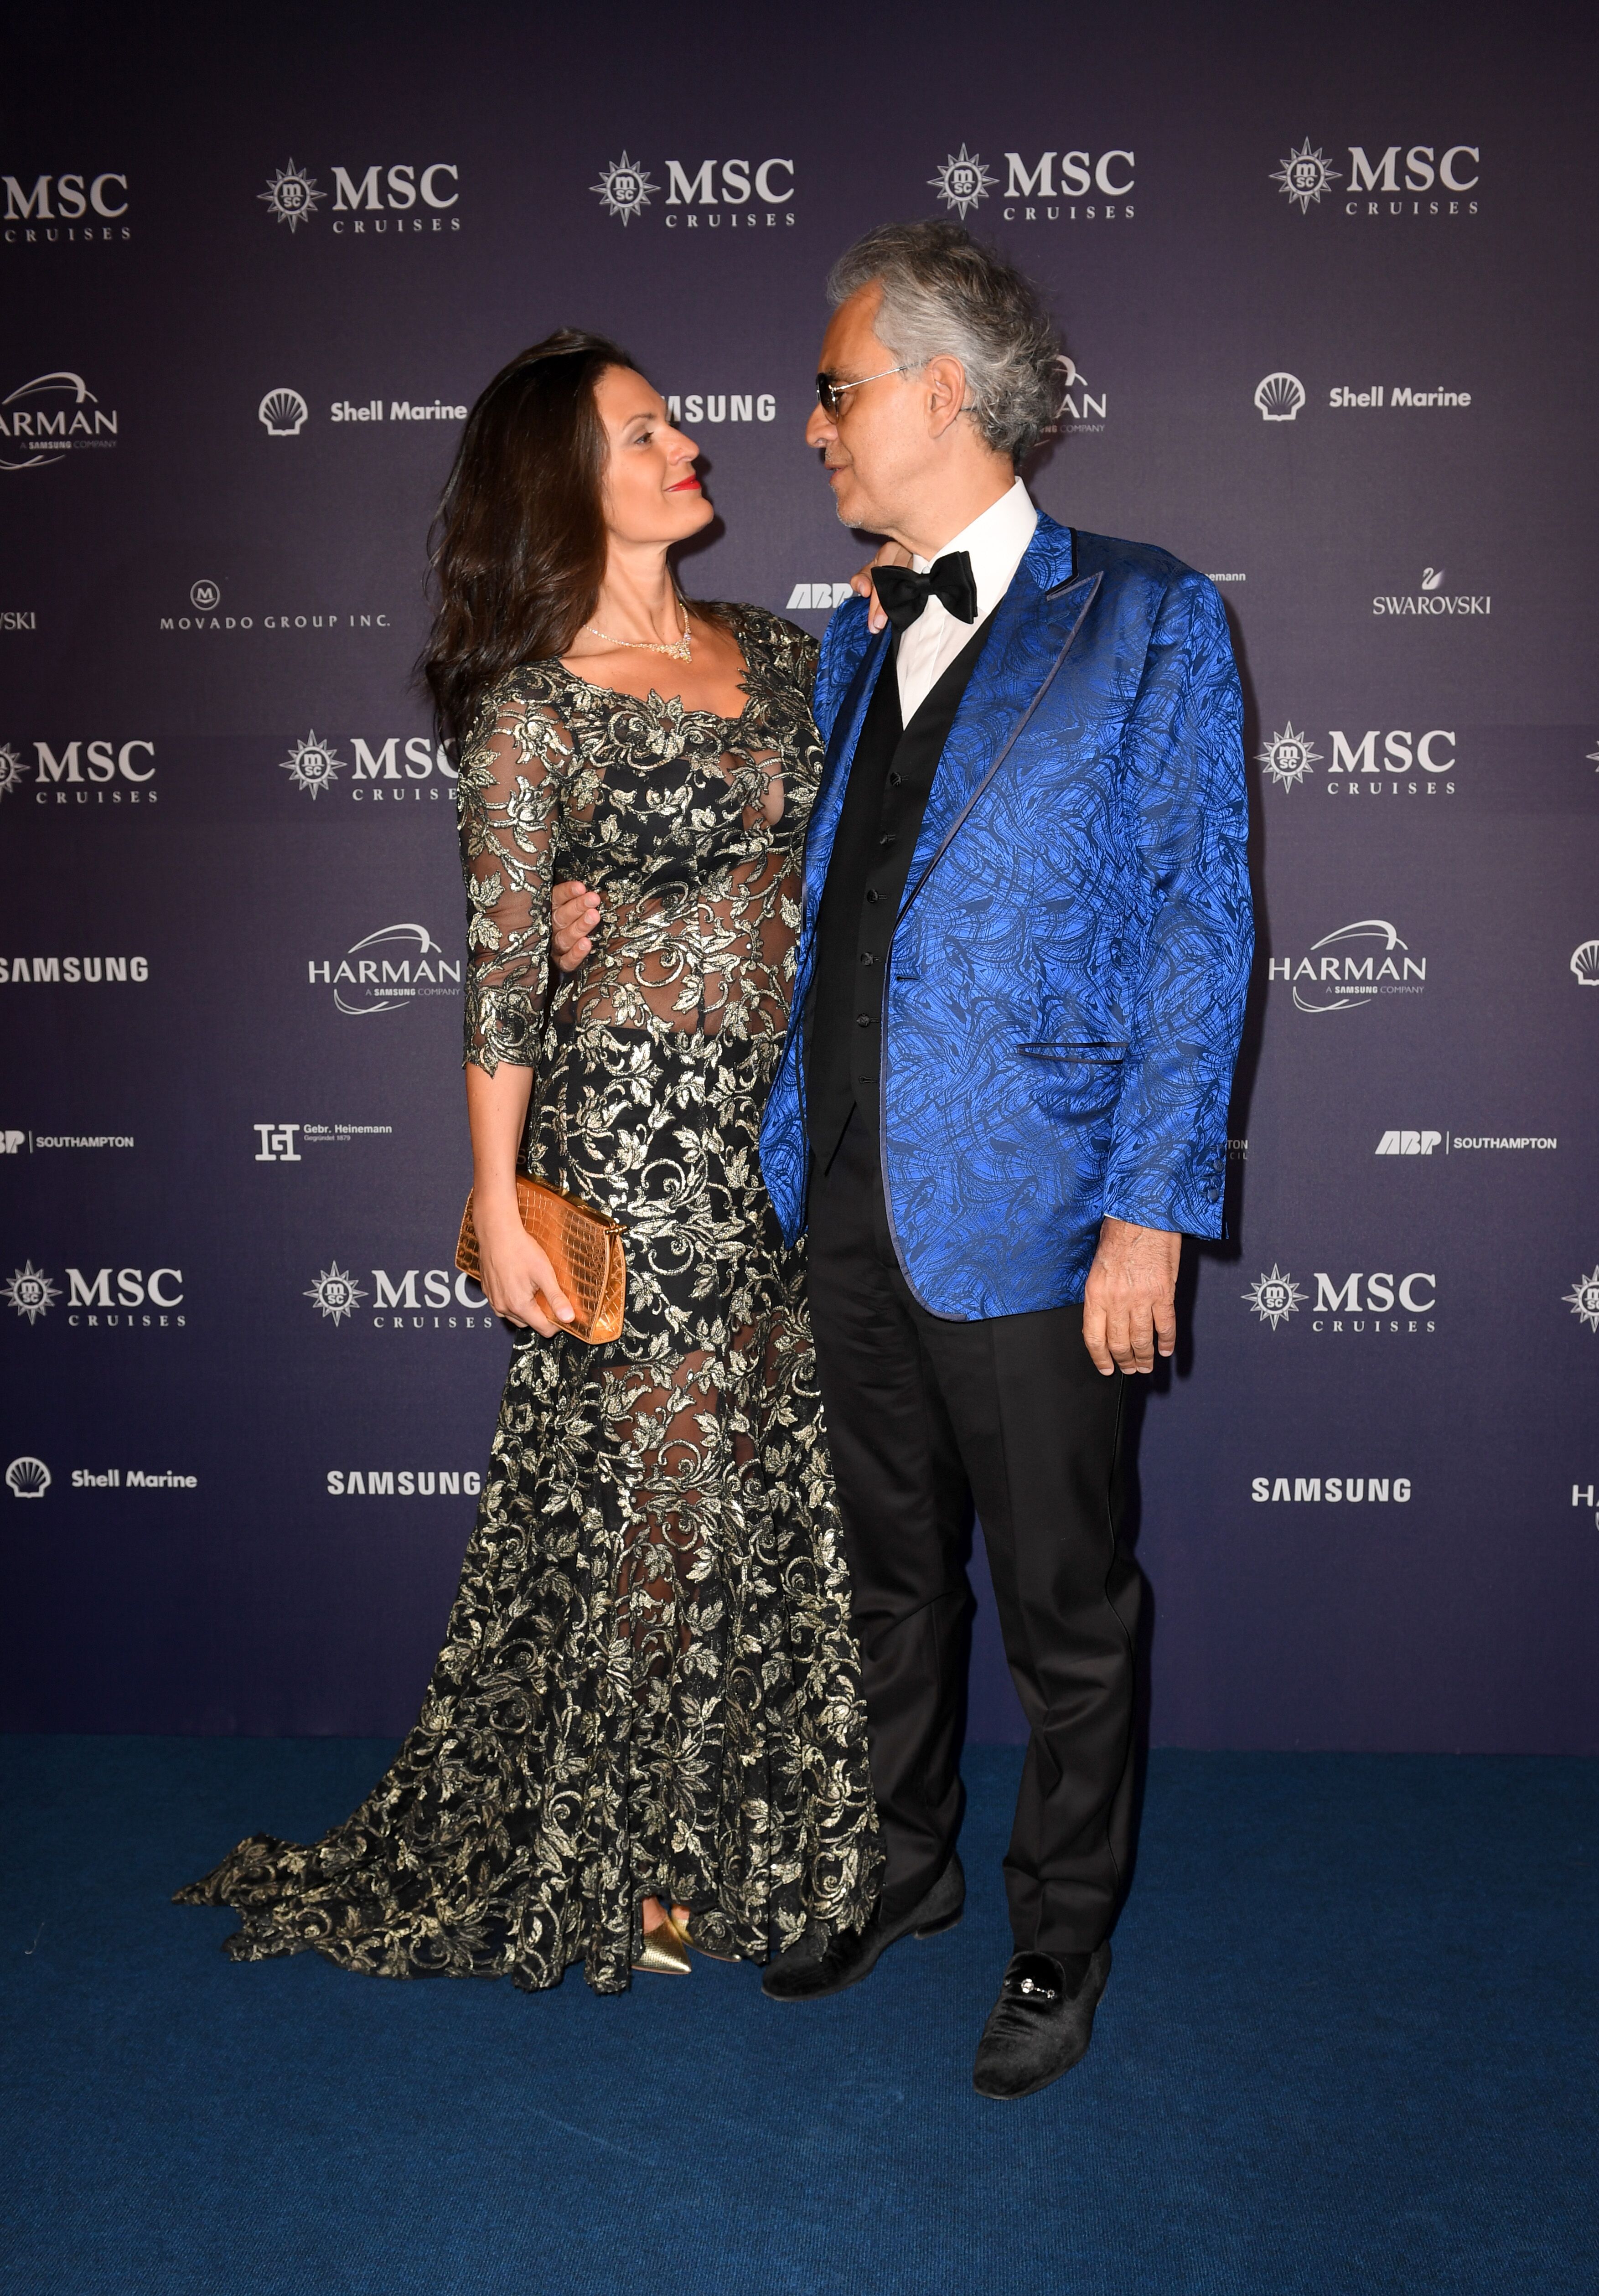 World famous tenor Andrea Bocelli and wife Veronica Berti attend the MSC Bellissima Naming Ceremony | Getty Images